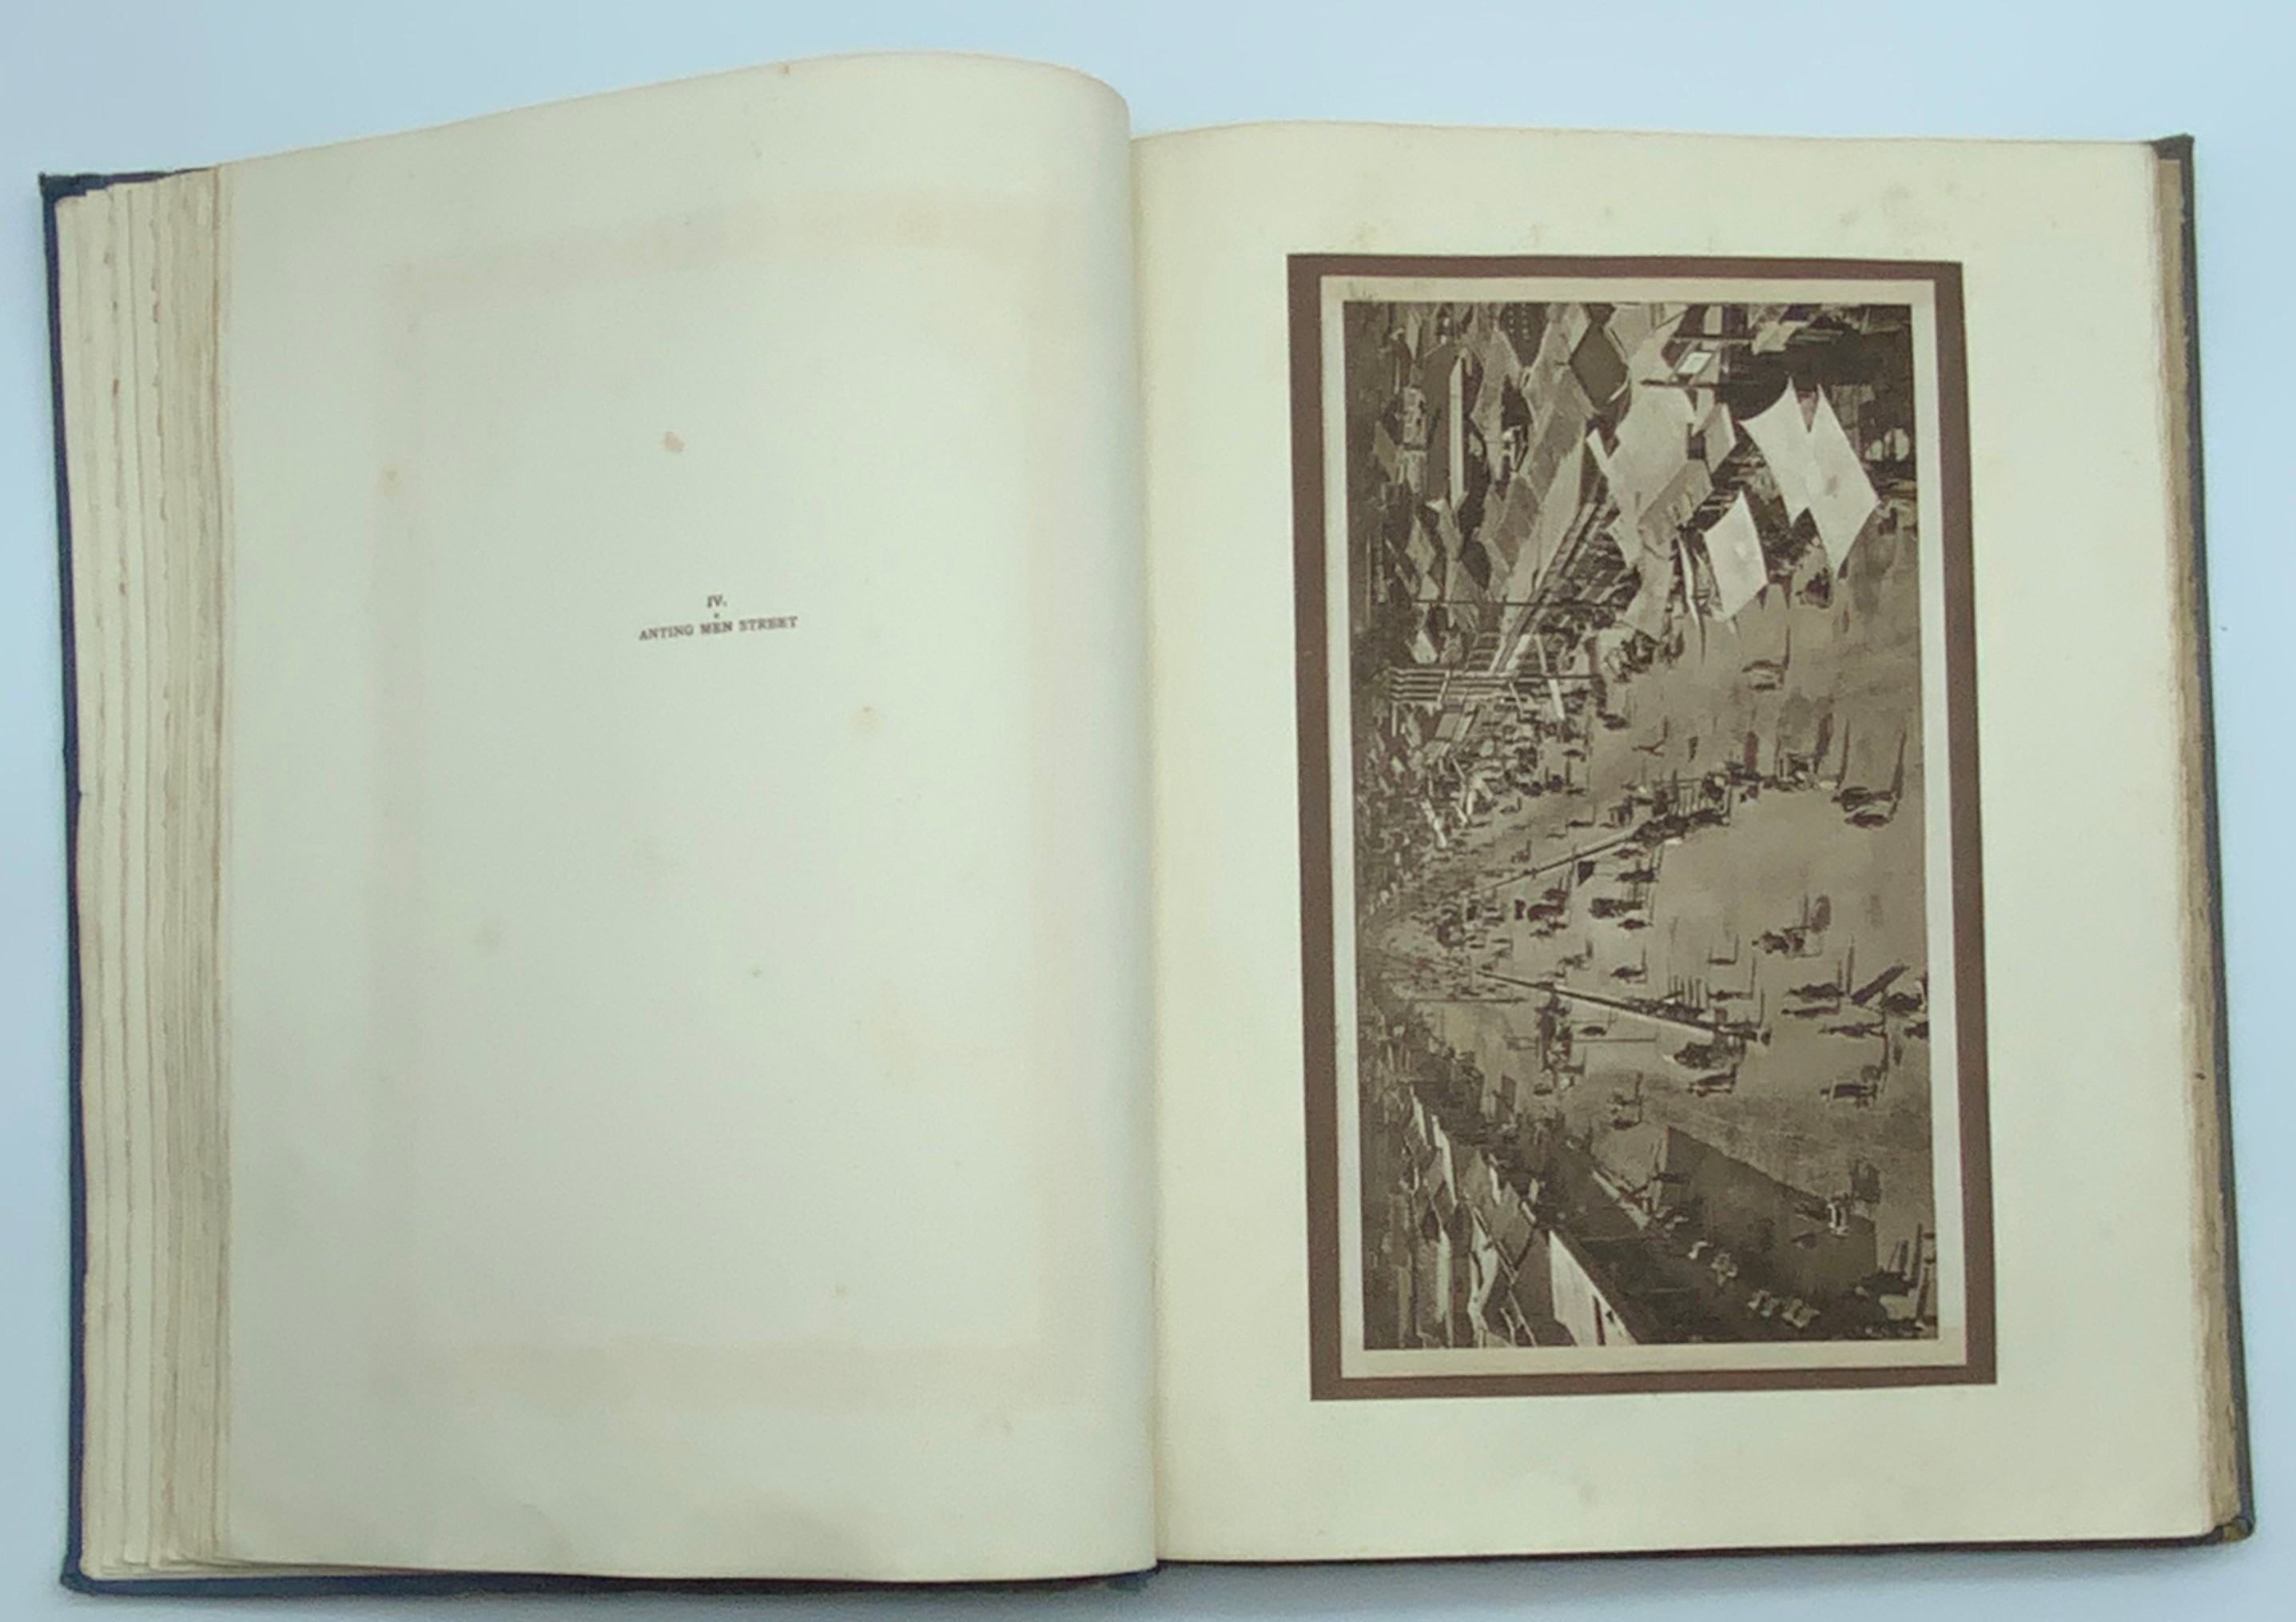 THE PAGEANT OF PEKING BY DONALD MENNIE 1920 LIMITED EDITION (701/1000) - Image 5 of 15